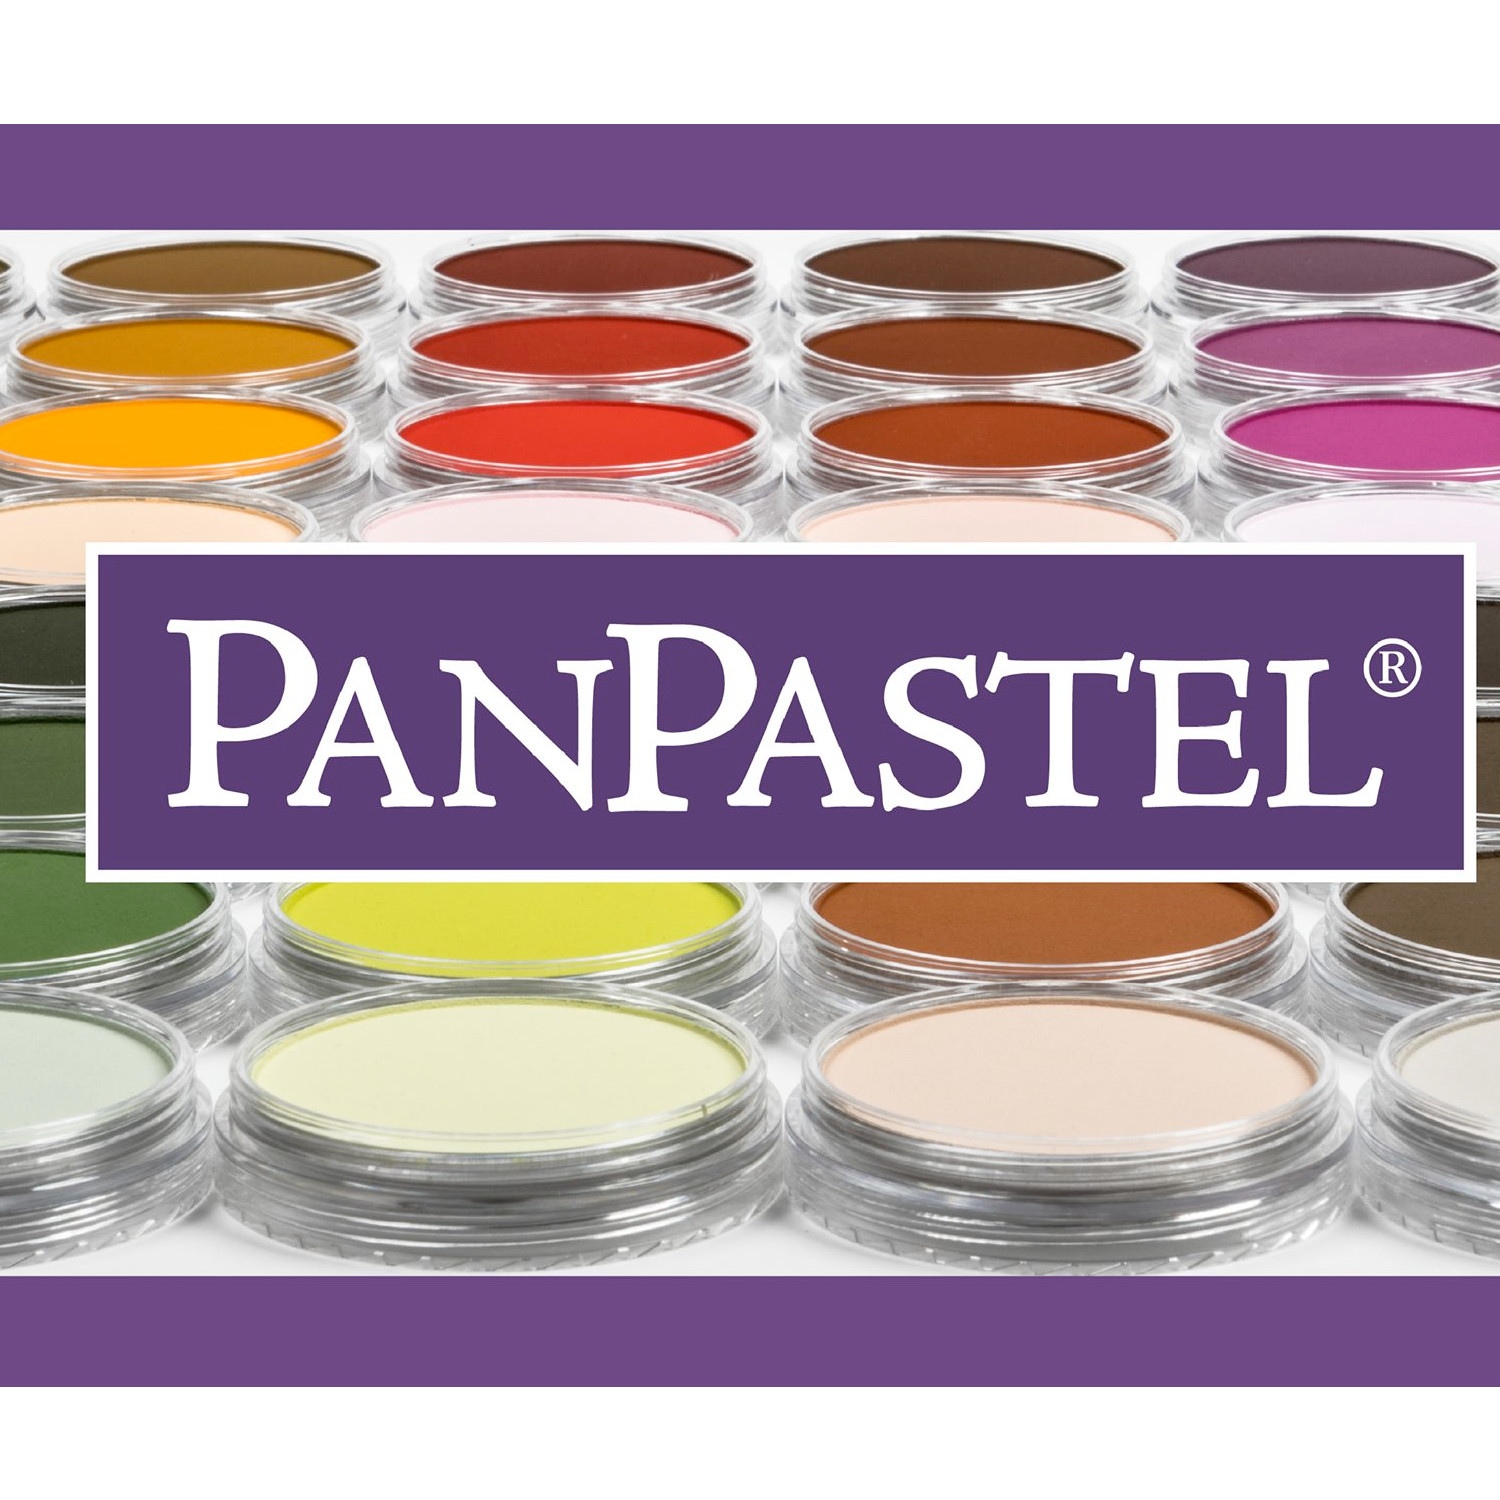 How to Use Pan Pastels 